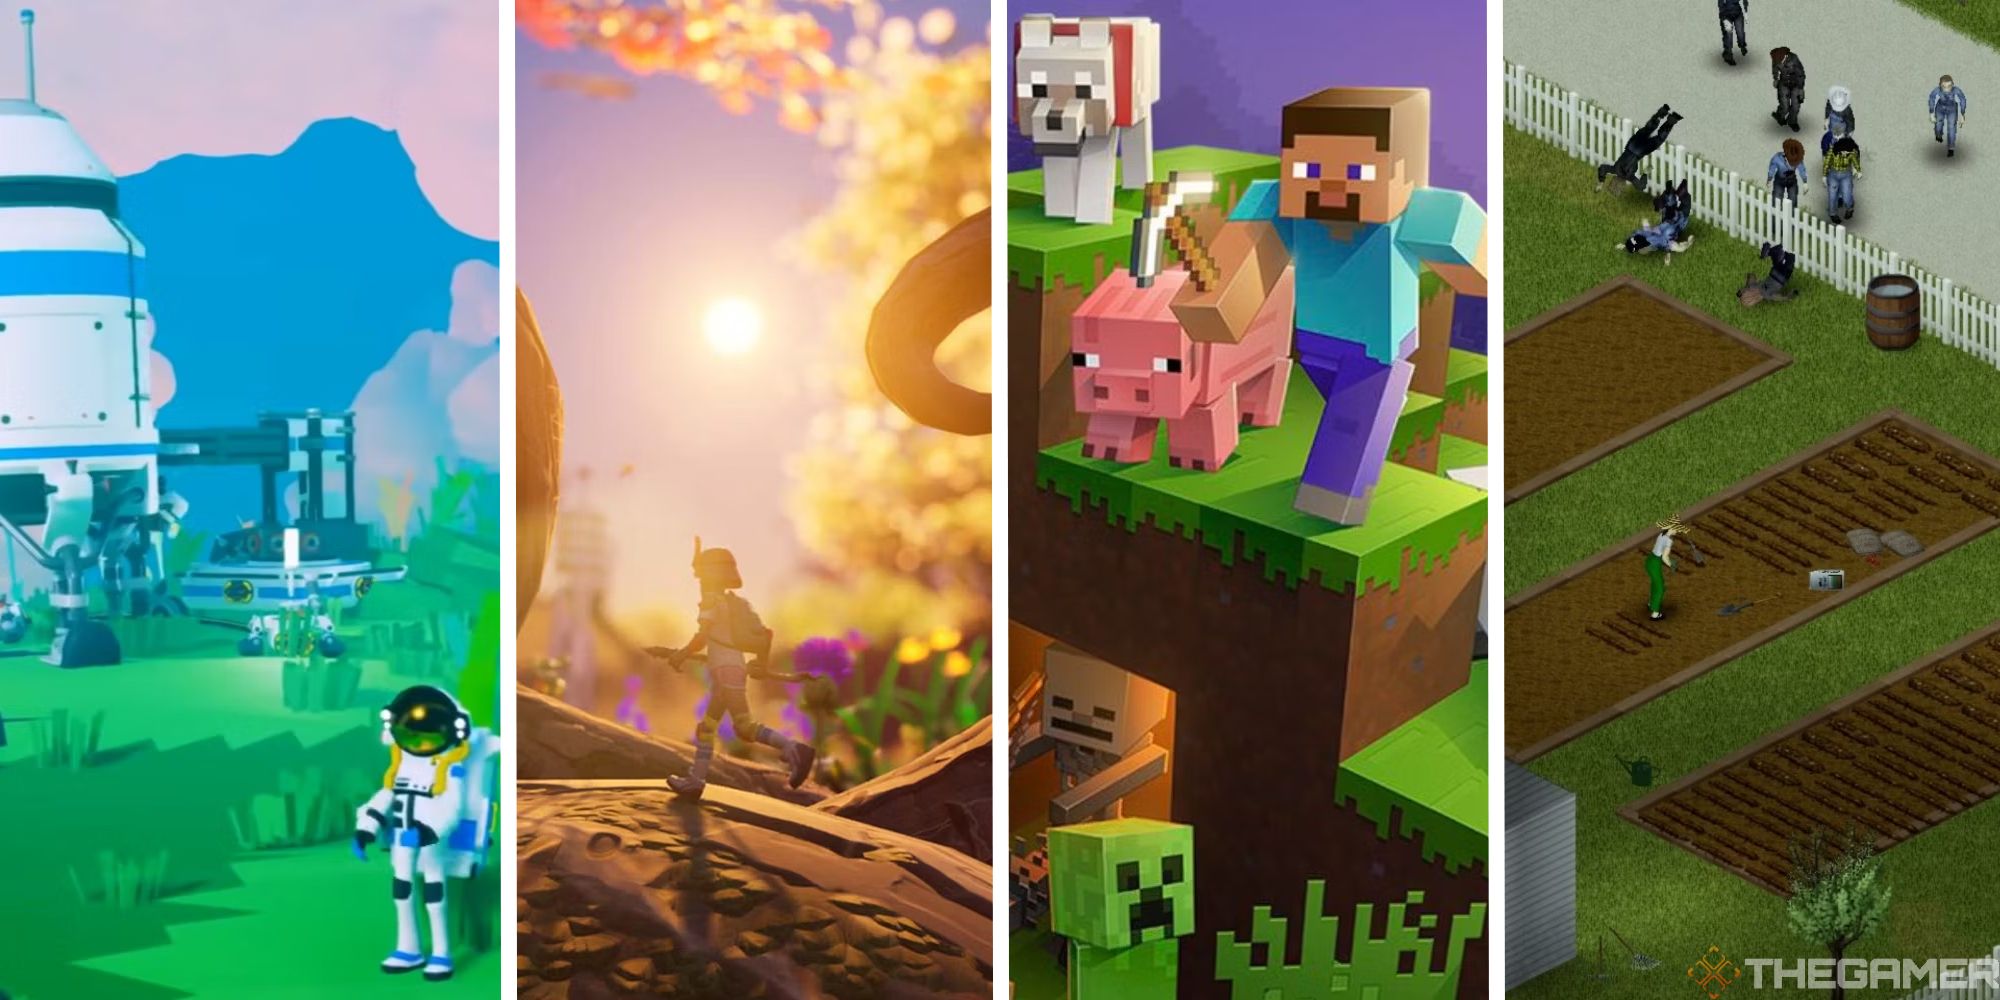 split image showing astroneer, grounded, minecraft, and project zomboid